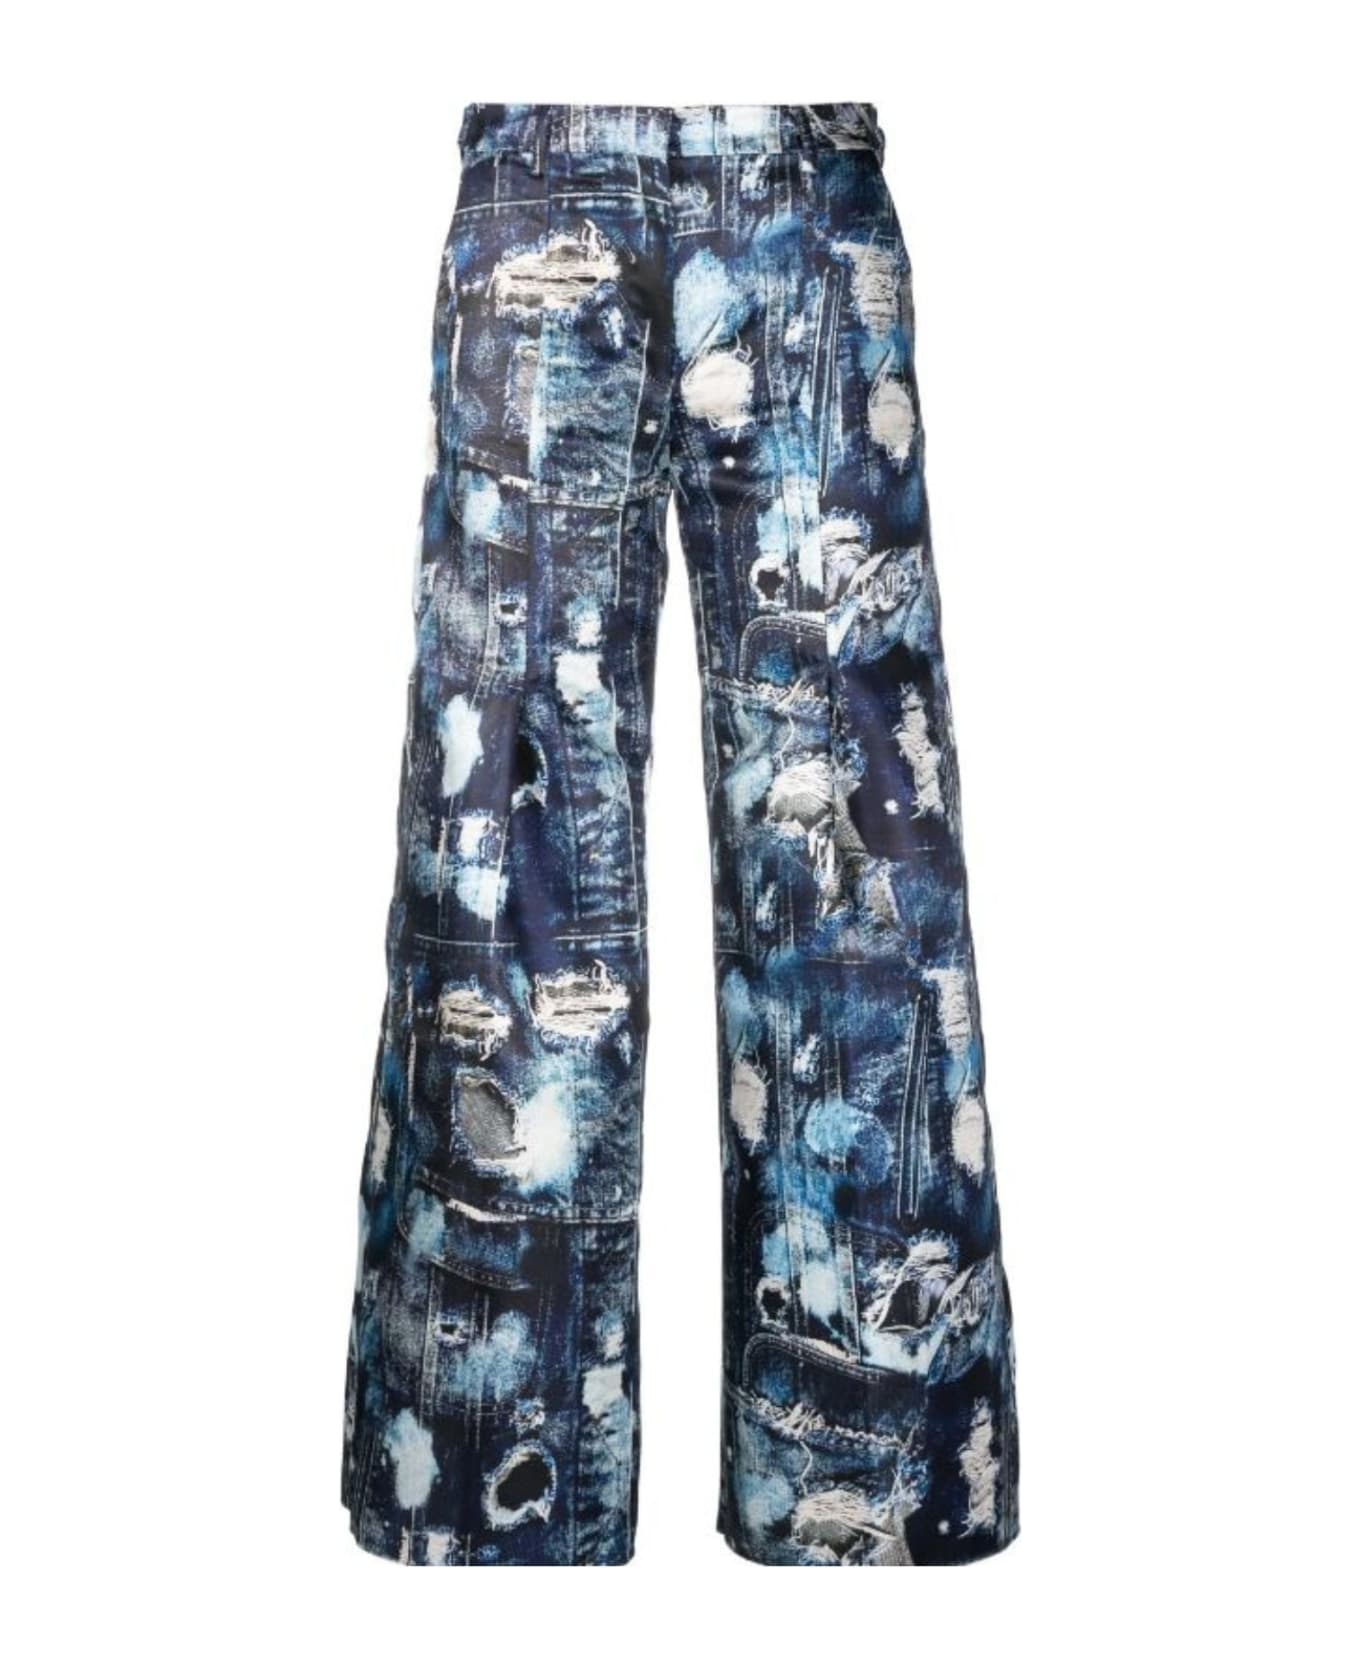 John Richmond Cropped Trousers With Wide Leg And Iconic Runway Denim-effect Pattern. - Fantasia